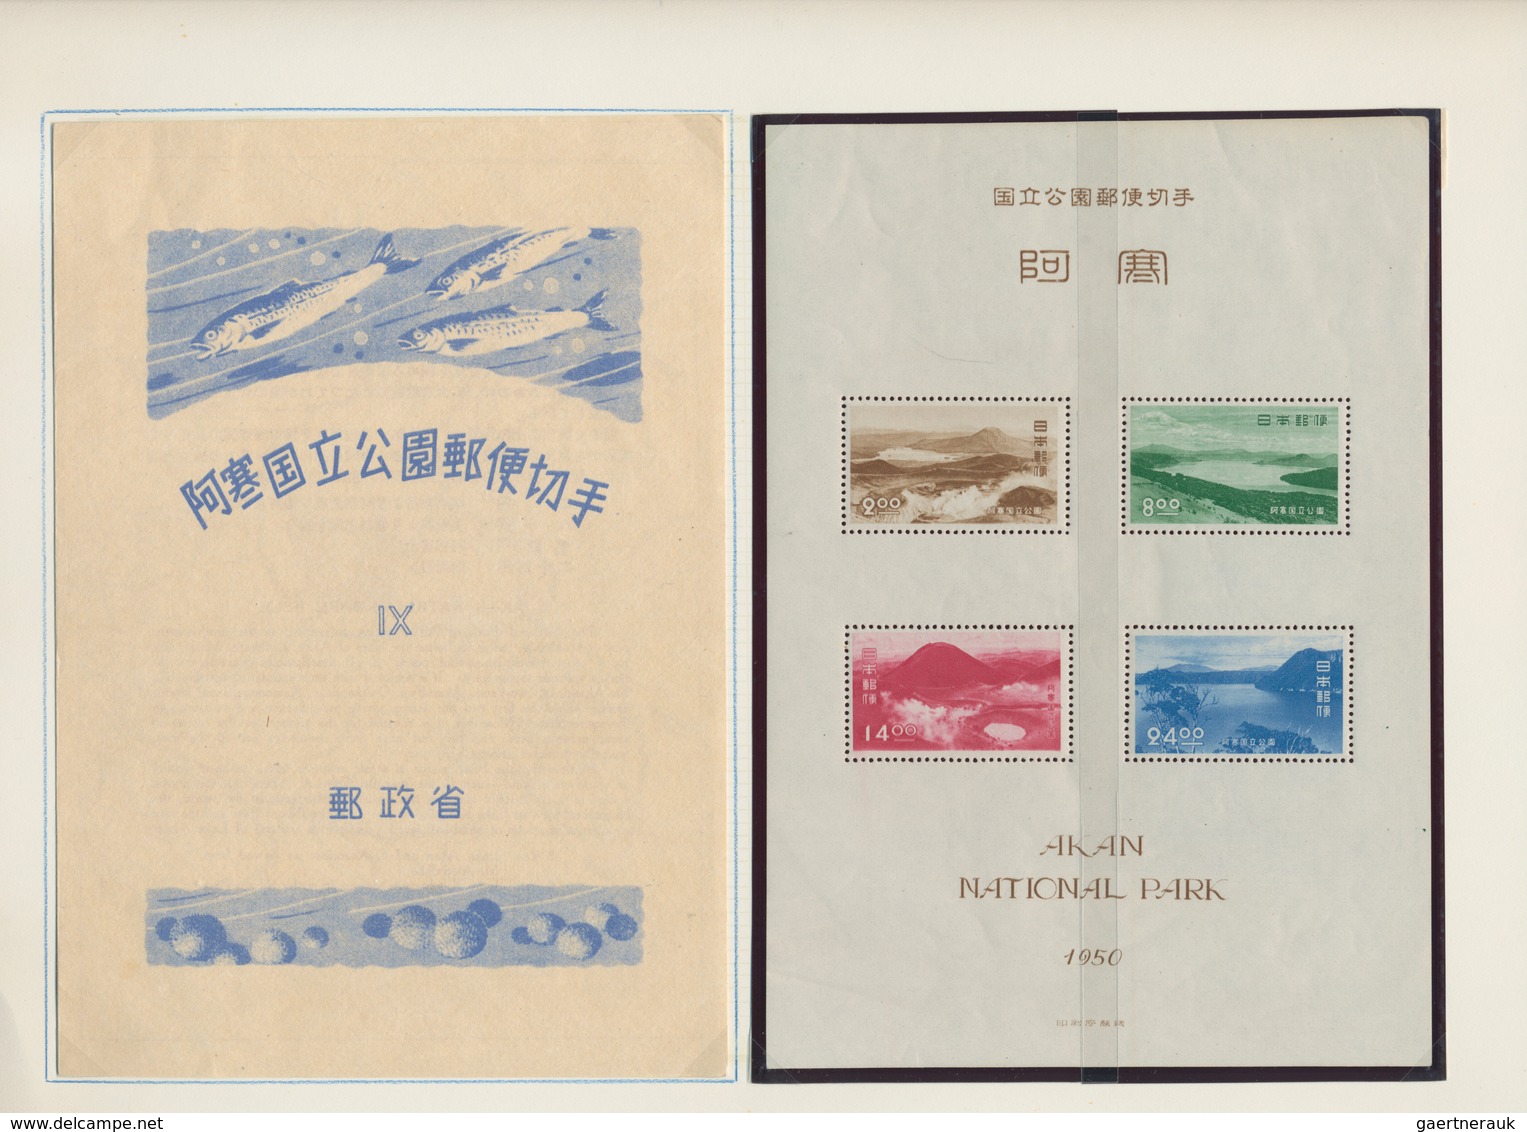 Japan: 1936/72, cpl. collection of National Park and QNP issues inc. all s/s all w. folders, mint ne